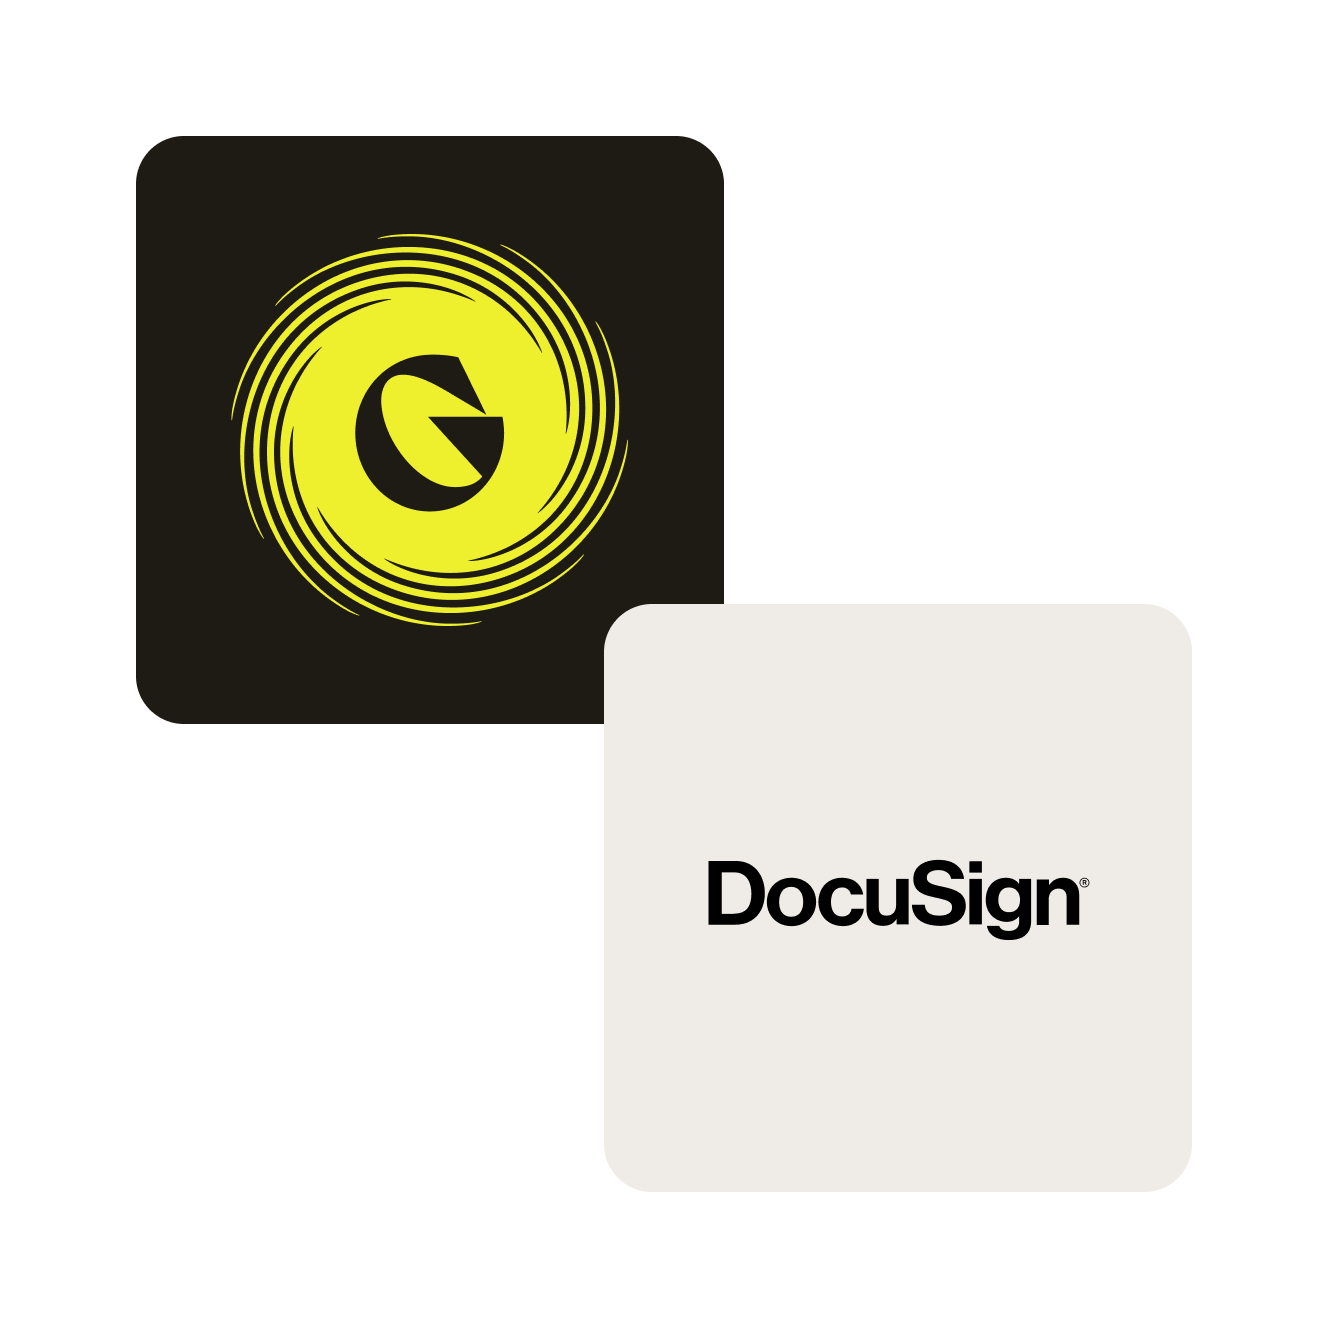 “GoCardless has become a key payment method option for DocuSign. And wherever we offer GoCardless, customers convert better.”